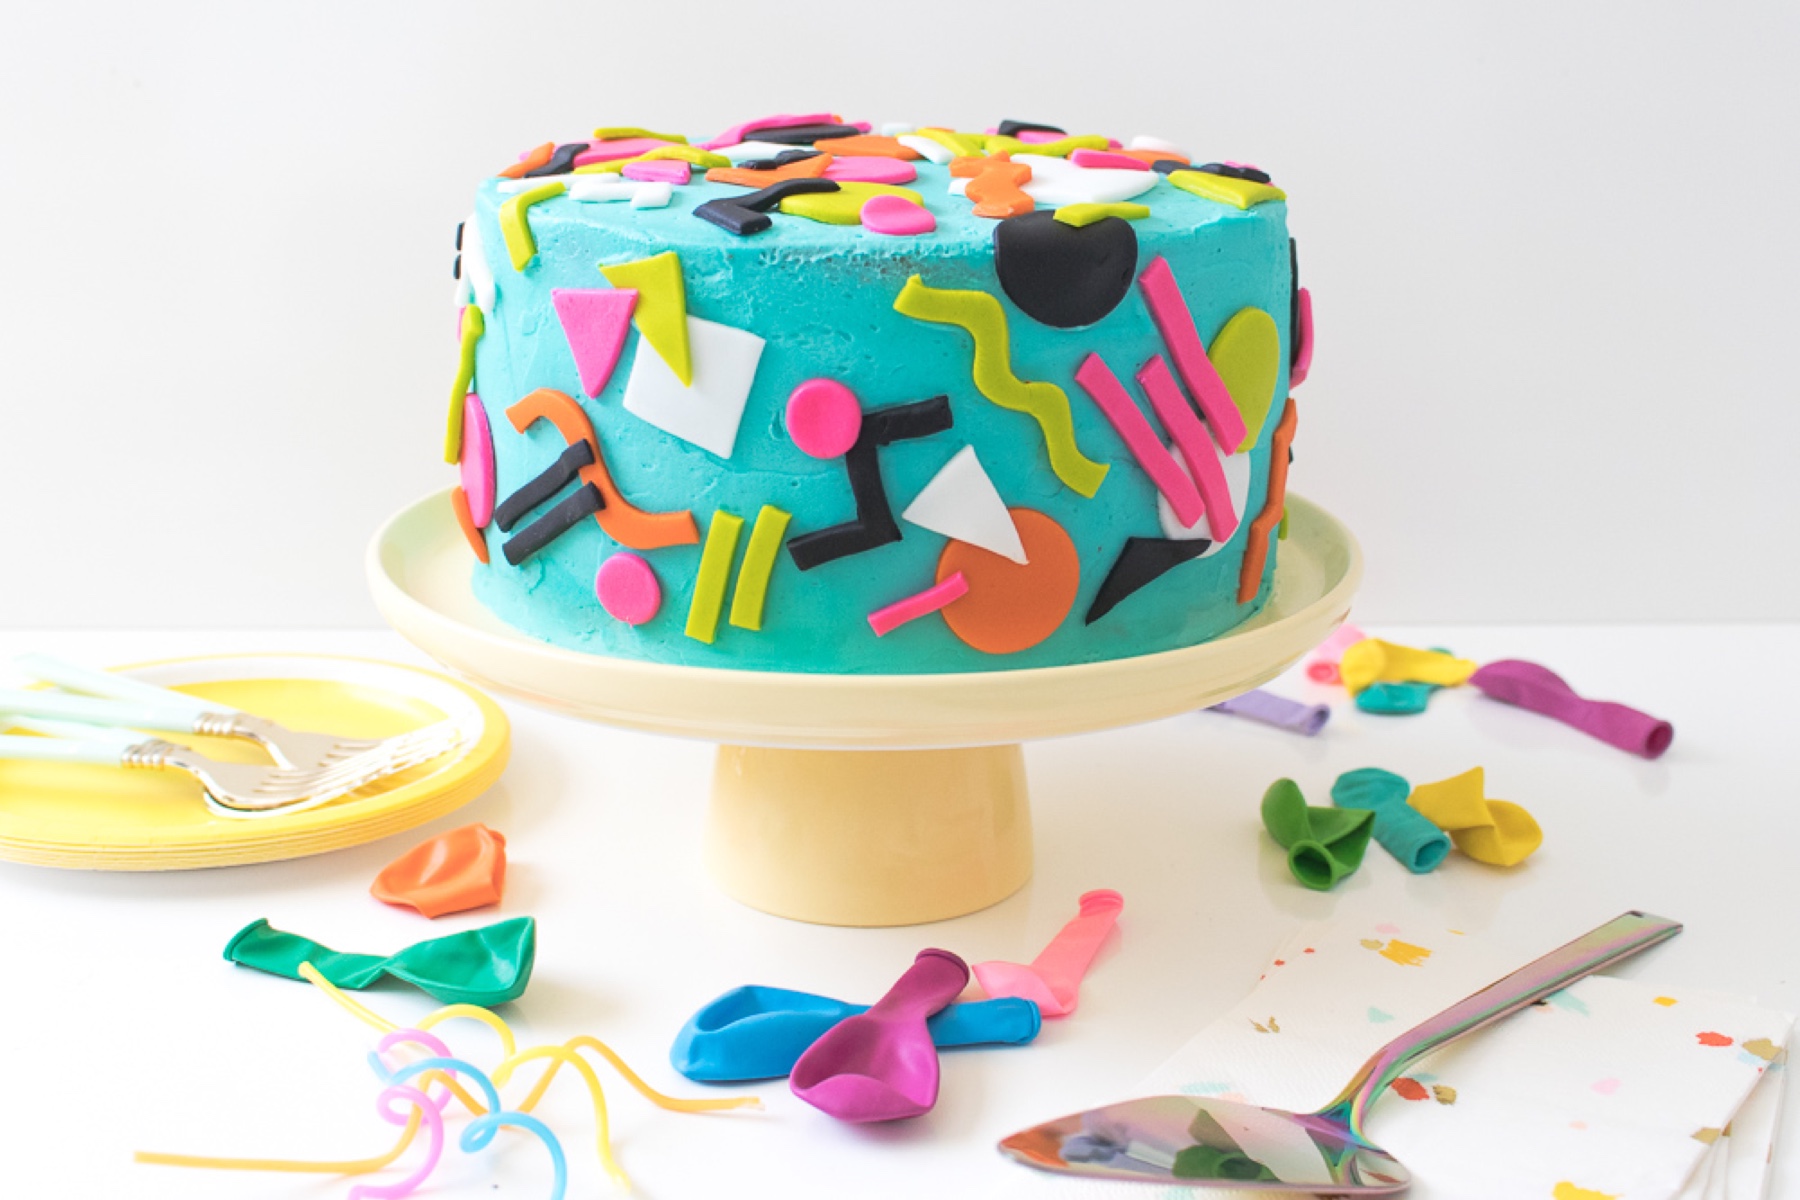 A blue cake decorated with bright Memphis-style geometric shapes.